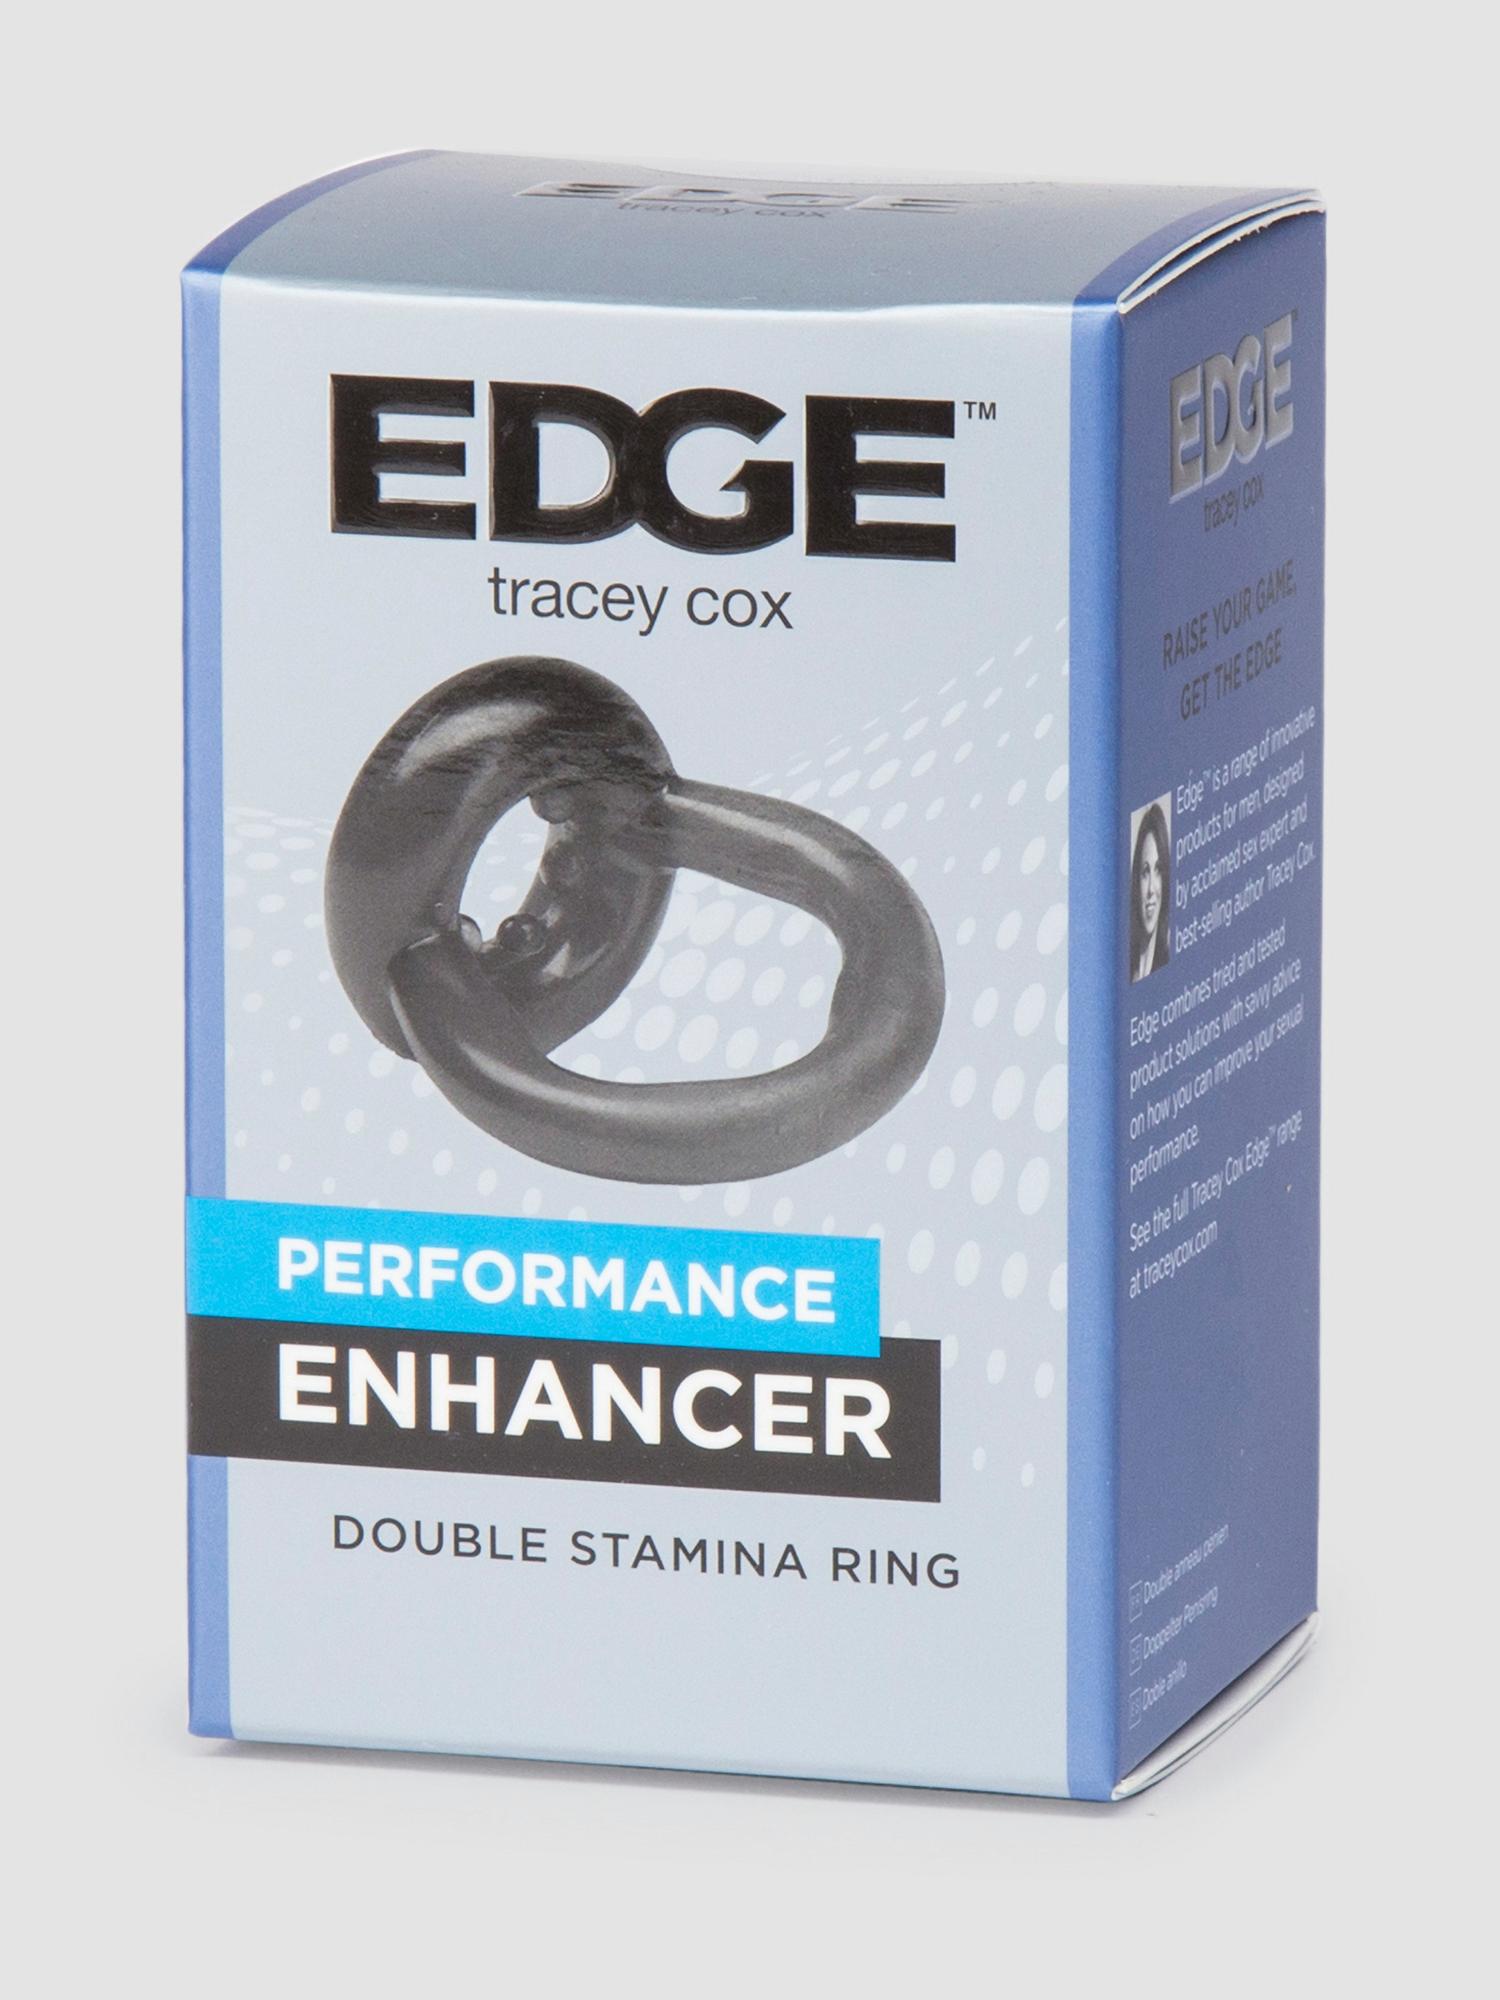 Tracey Cox EDGE Double Stamina Ring. Slide 5